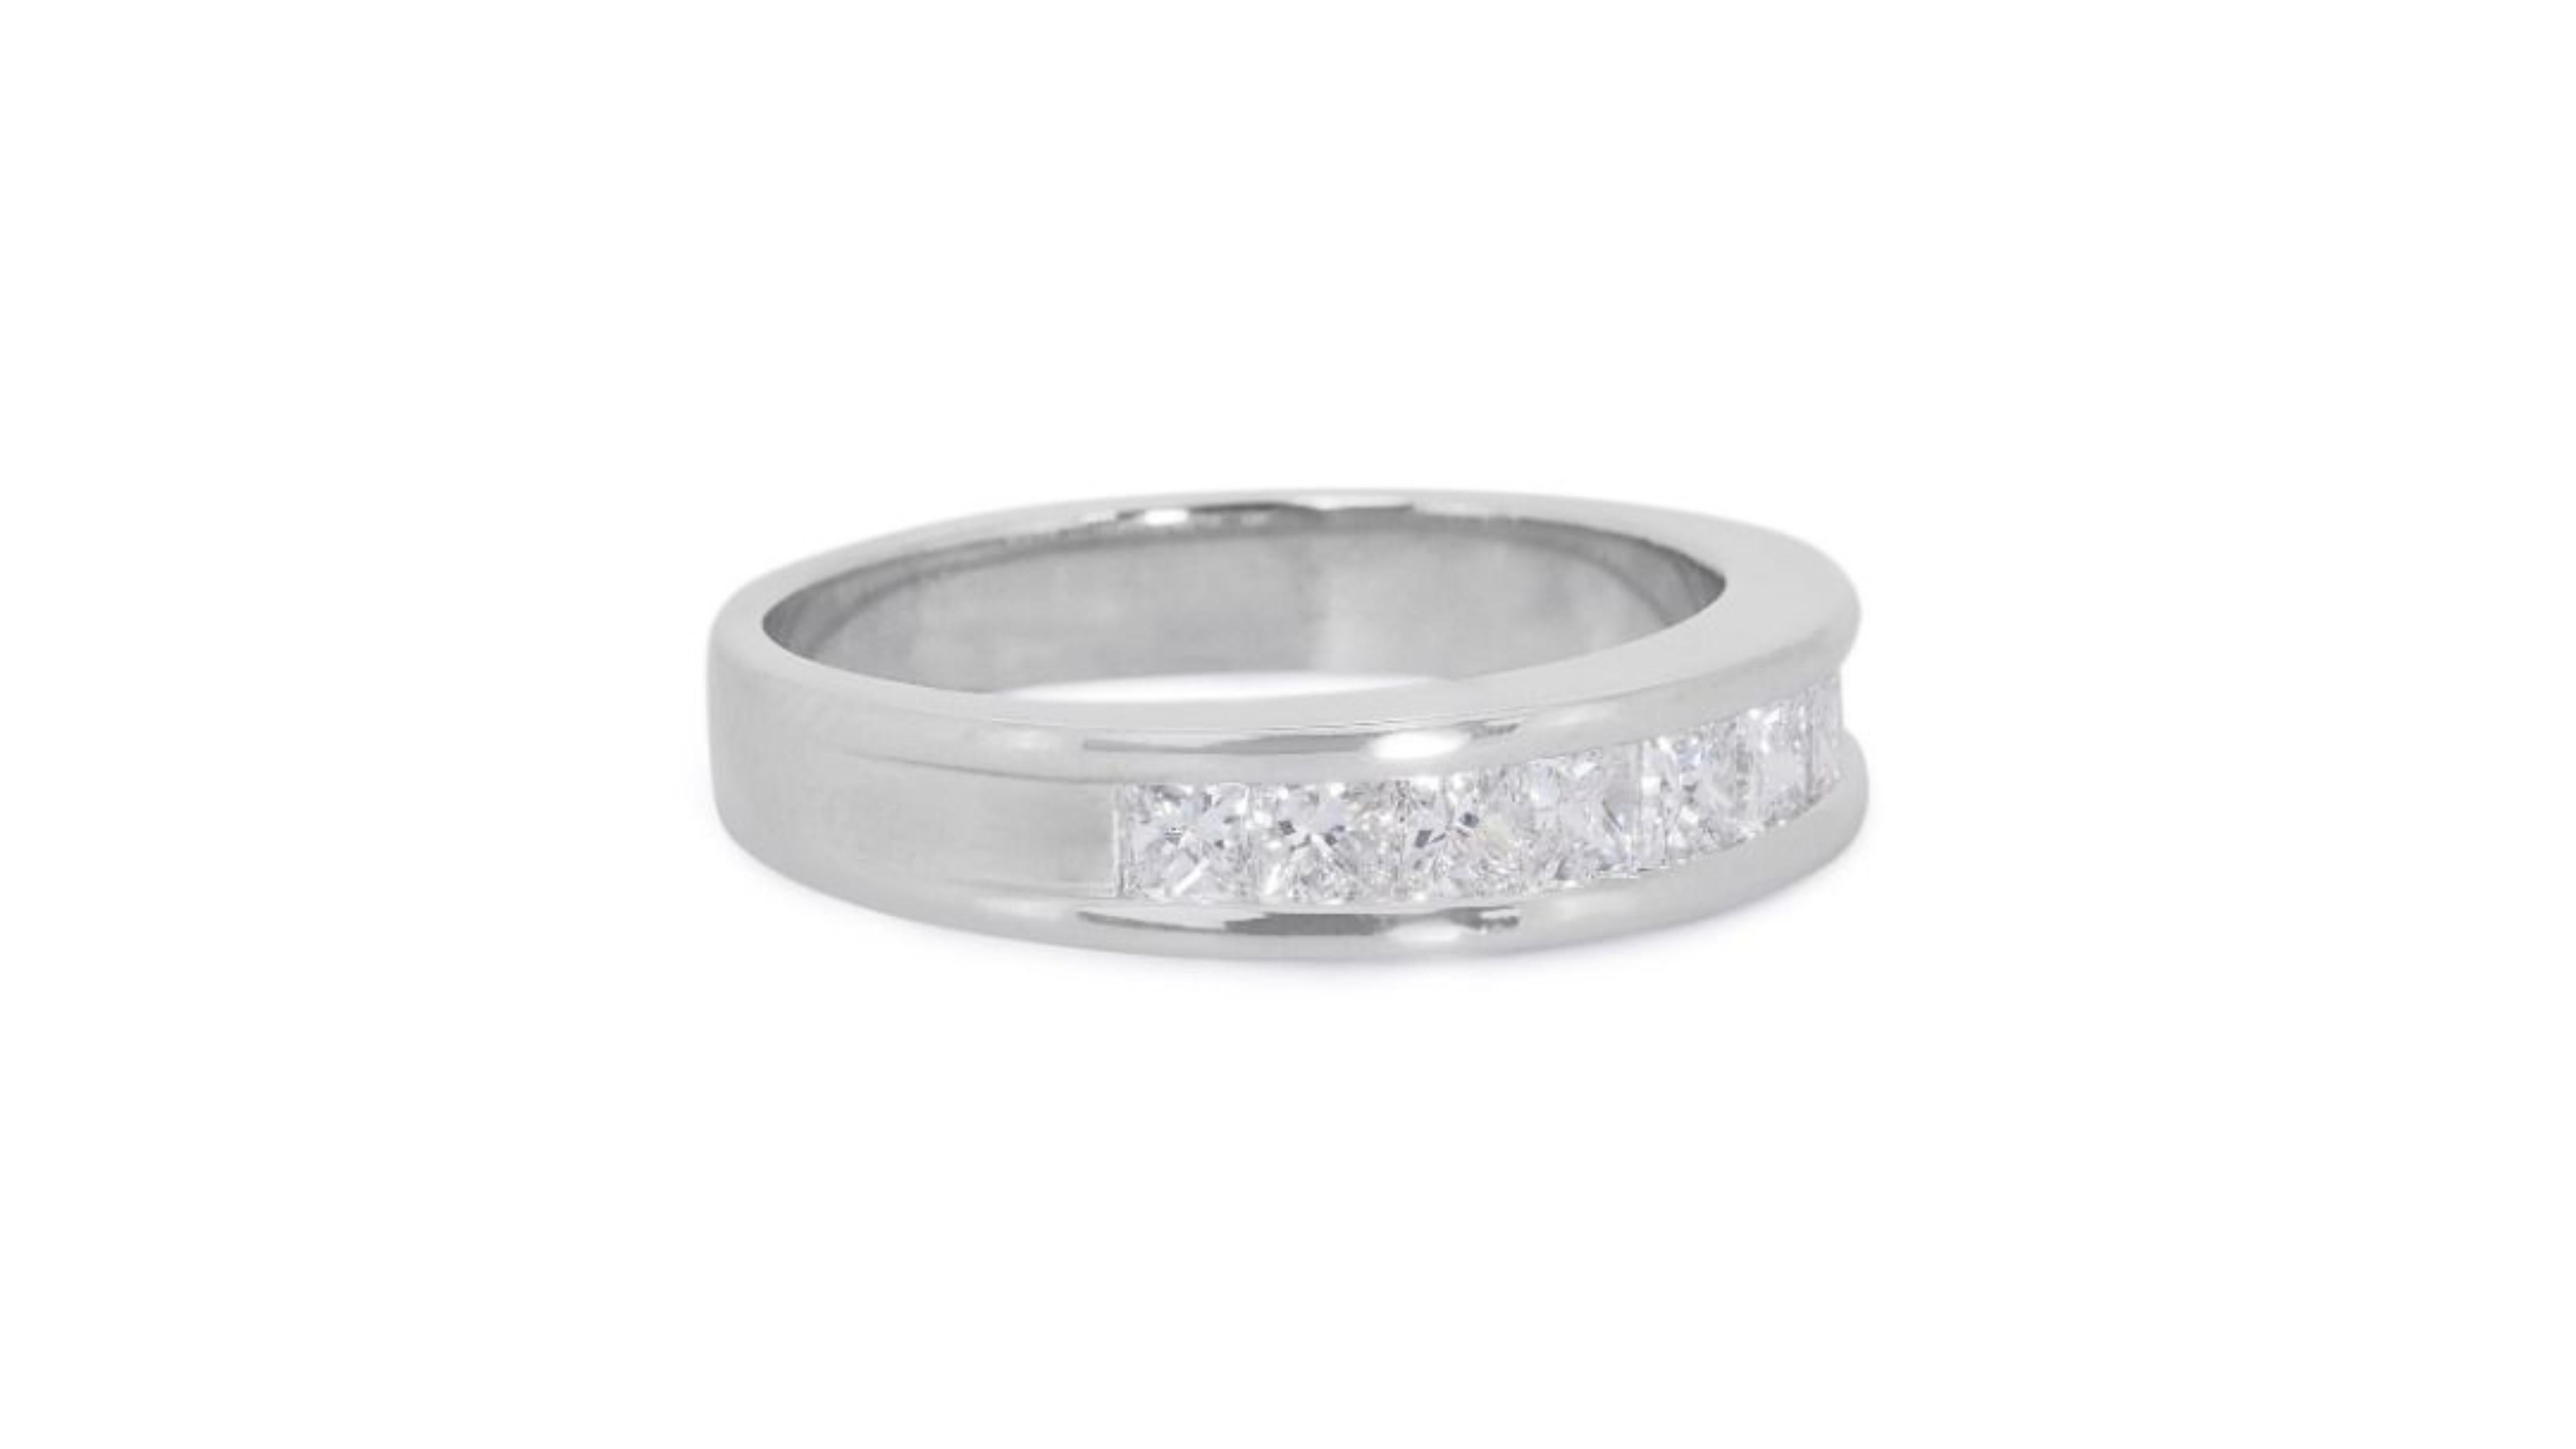 Marvelous 18k White Gold Ring with 1.05ct. Princess Diamond Pave For Sale 2